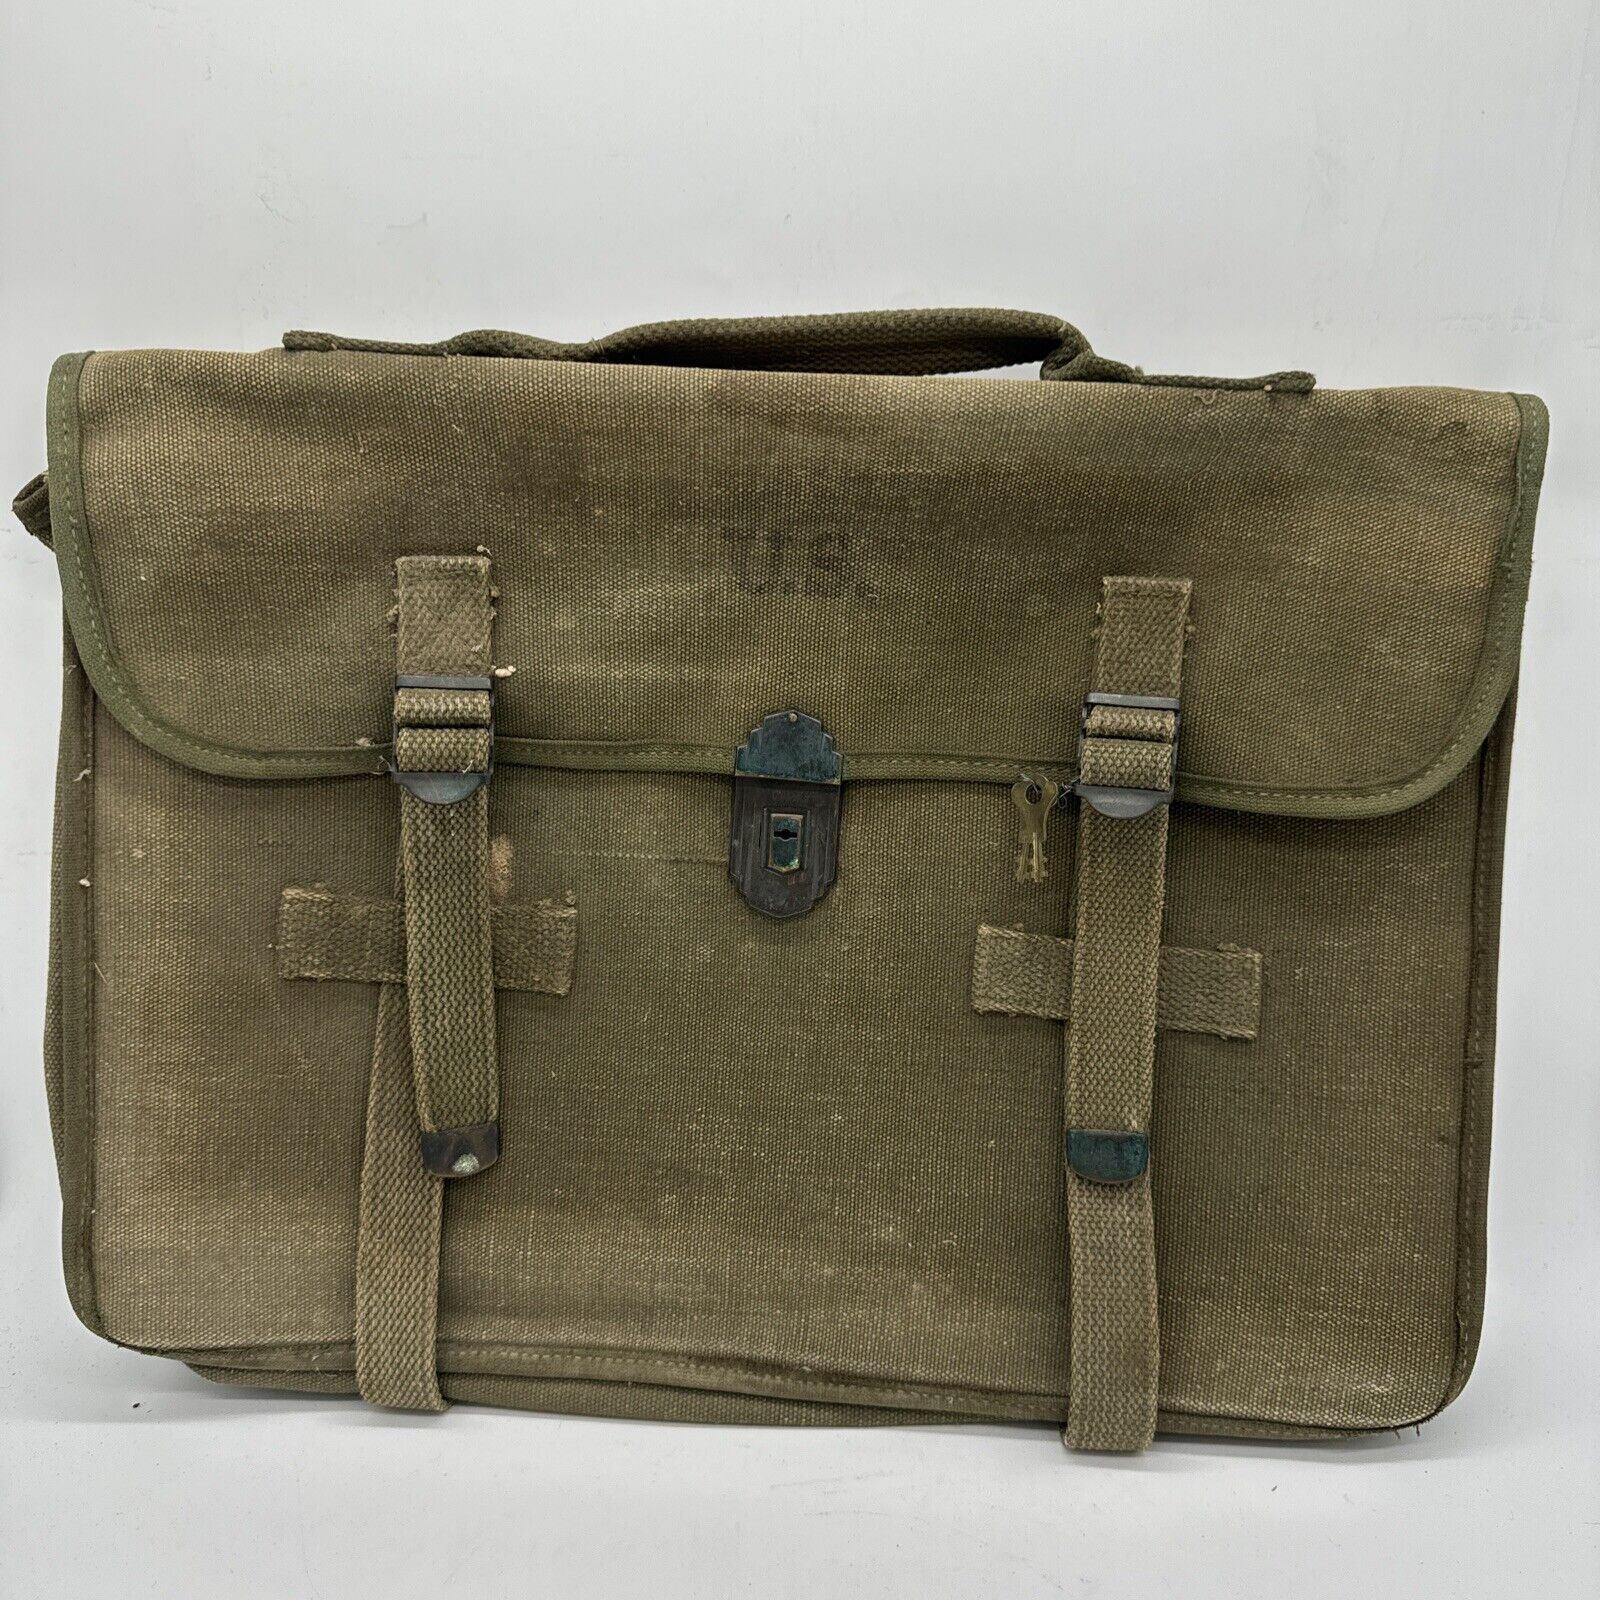 VTG Rare 1950s US Military Officer Canvas Locking Document Briefcase With Keys